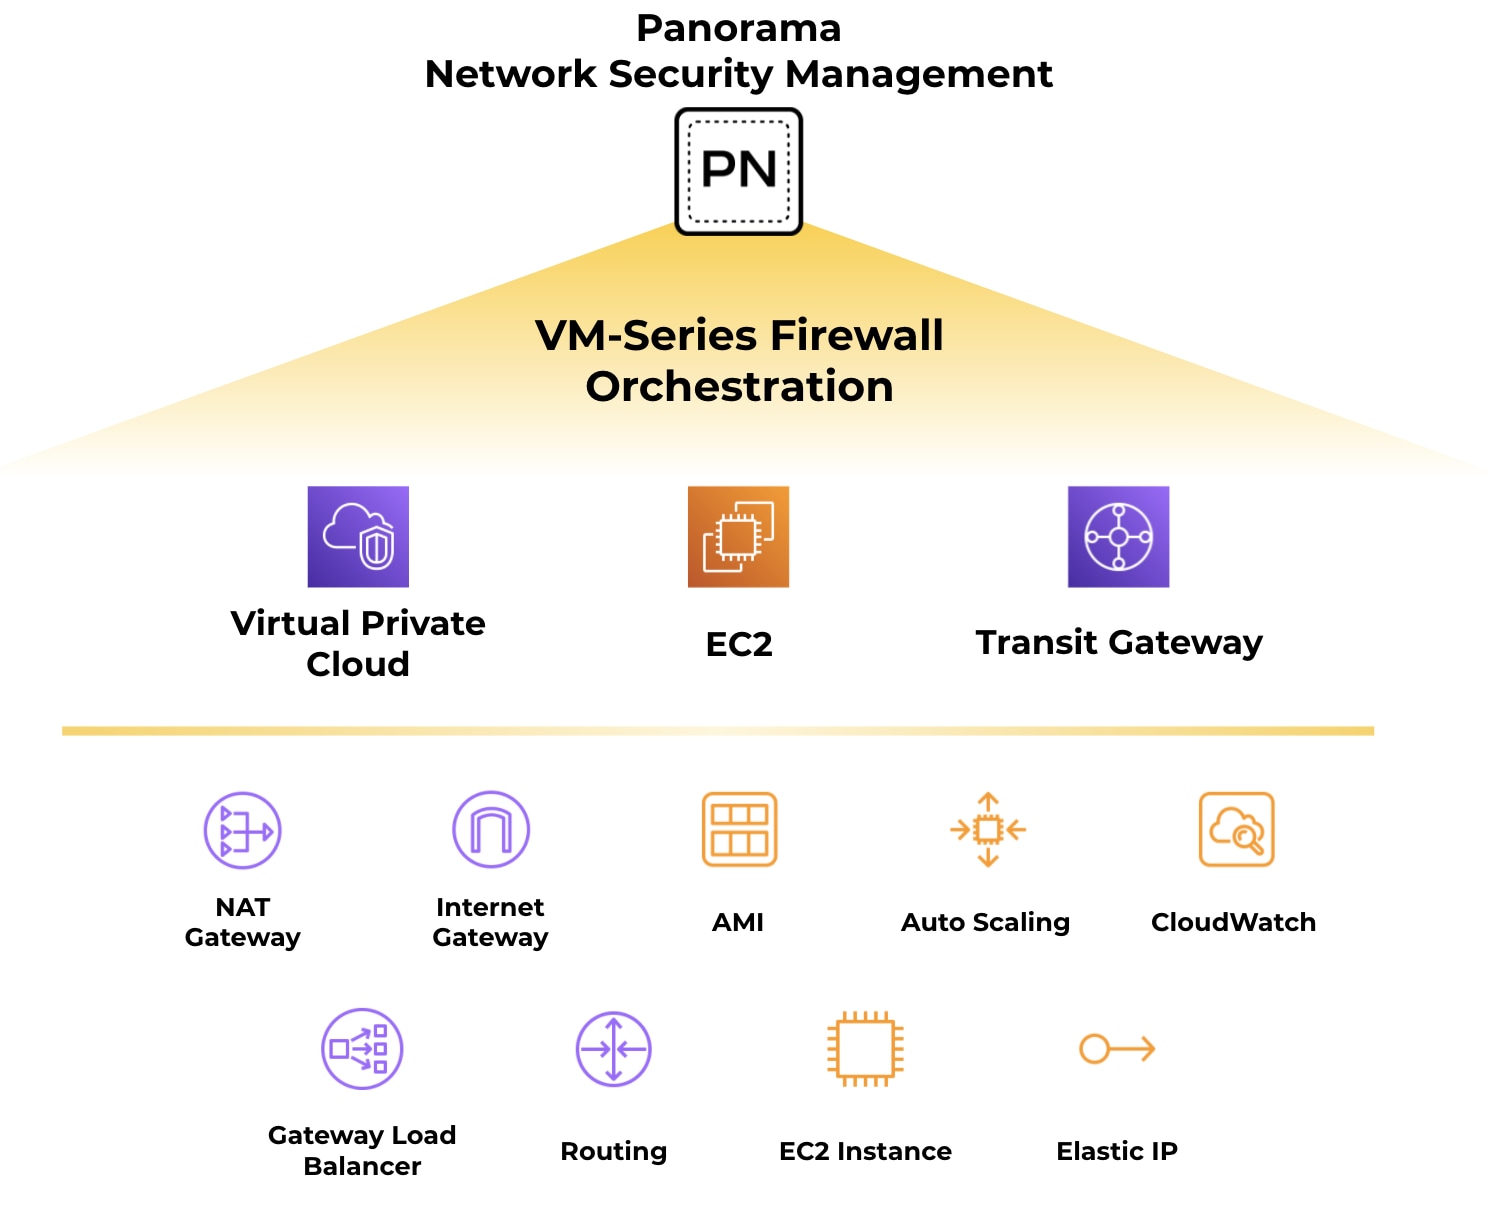 Save time and effort - streamline VM-Series firewall deployment in AWS with VM-Series NGFW Orchestration for AWS.